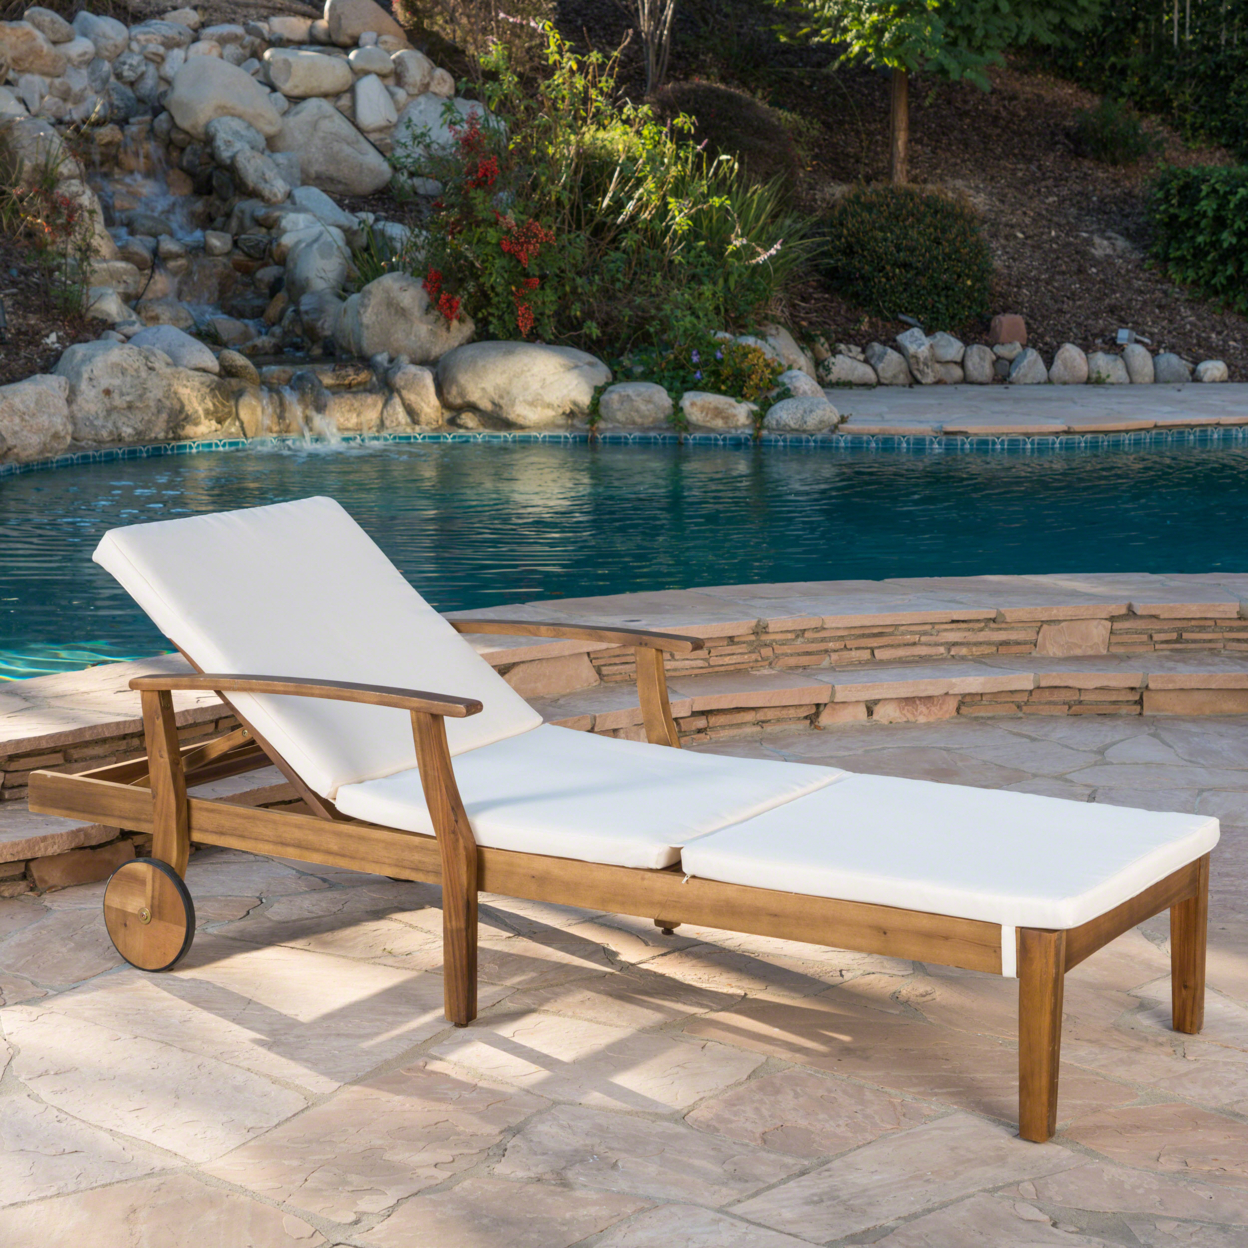 Daisy Outdoor Teak Finish Chaise Lounge With Water Resistant Cushion - Cream, Single